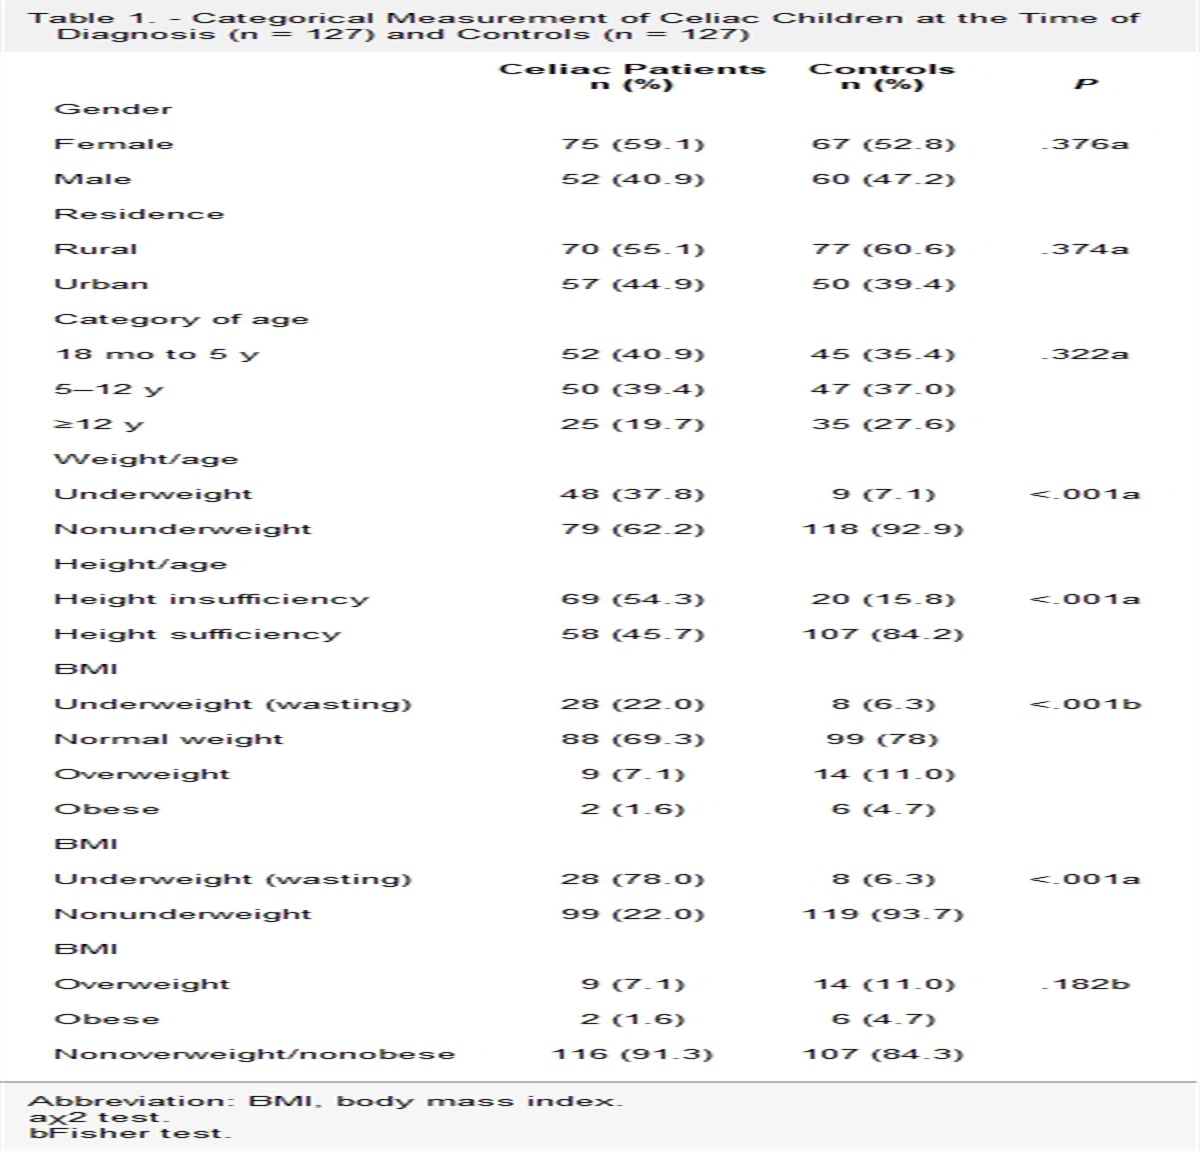 Nutritional Status of Moroccan Pediatric Patients With Celiac Disease: Comparison Between the Time of Diagnosis and After Following the Gluten-Free Diet